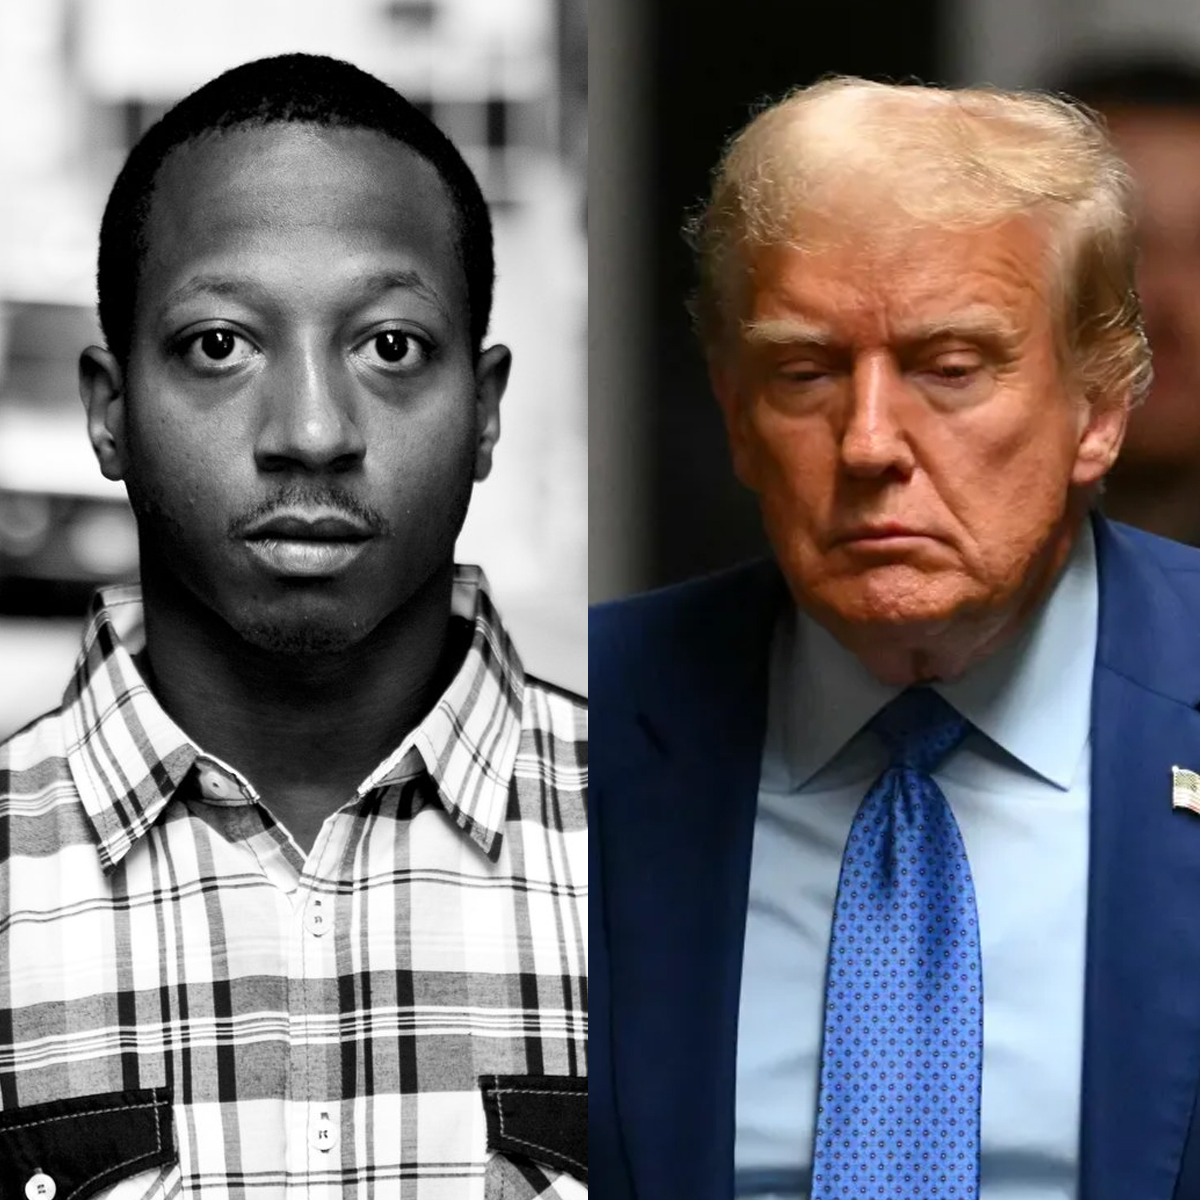 If Kalief Browder could be arrested and spend over 1,000 days in Riker's Island prison, without even getting due process, for the crime of allegedly stealing a backpack and being unable to afford $3,000 bail... ...then Donald Trump — who has been afforded every convenience, a